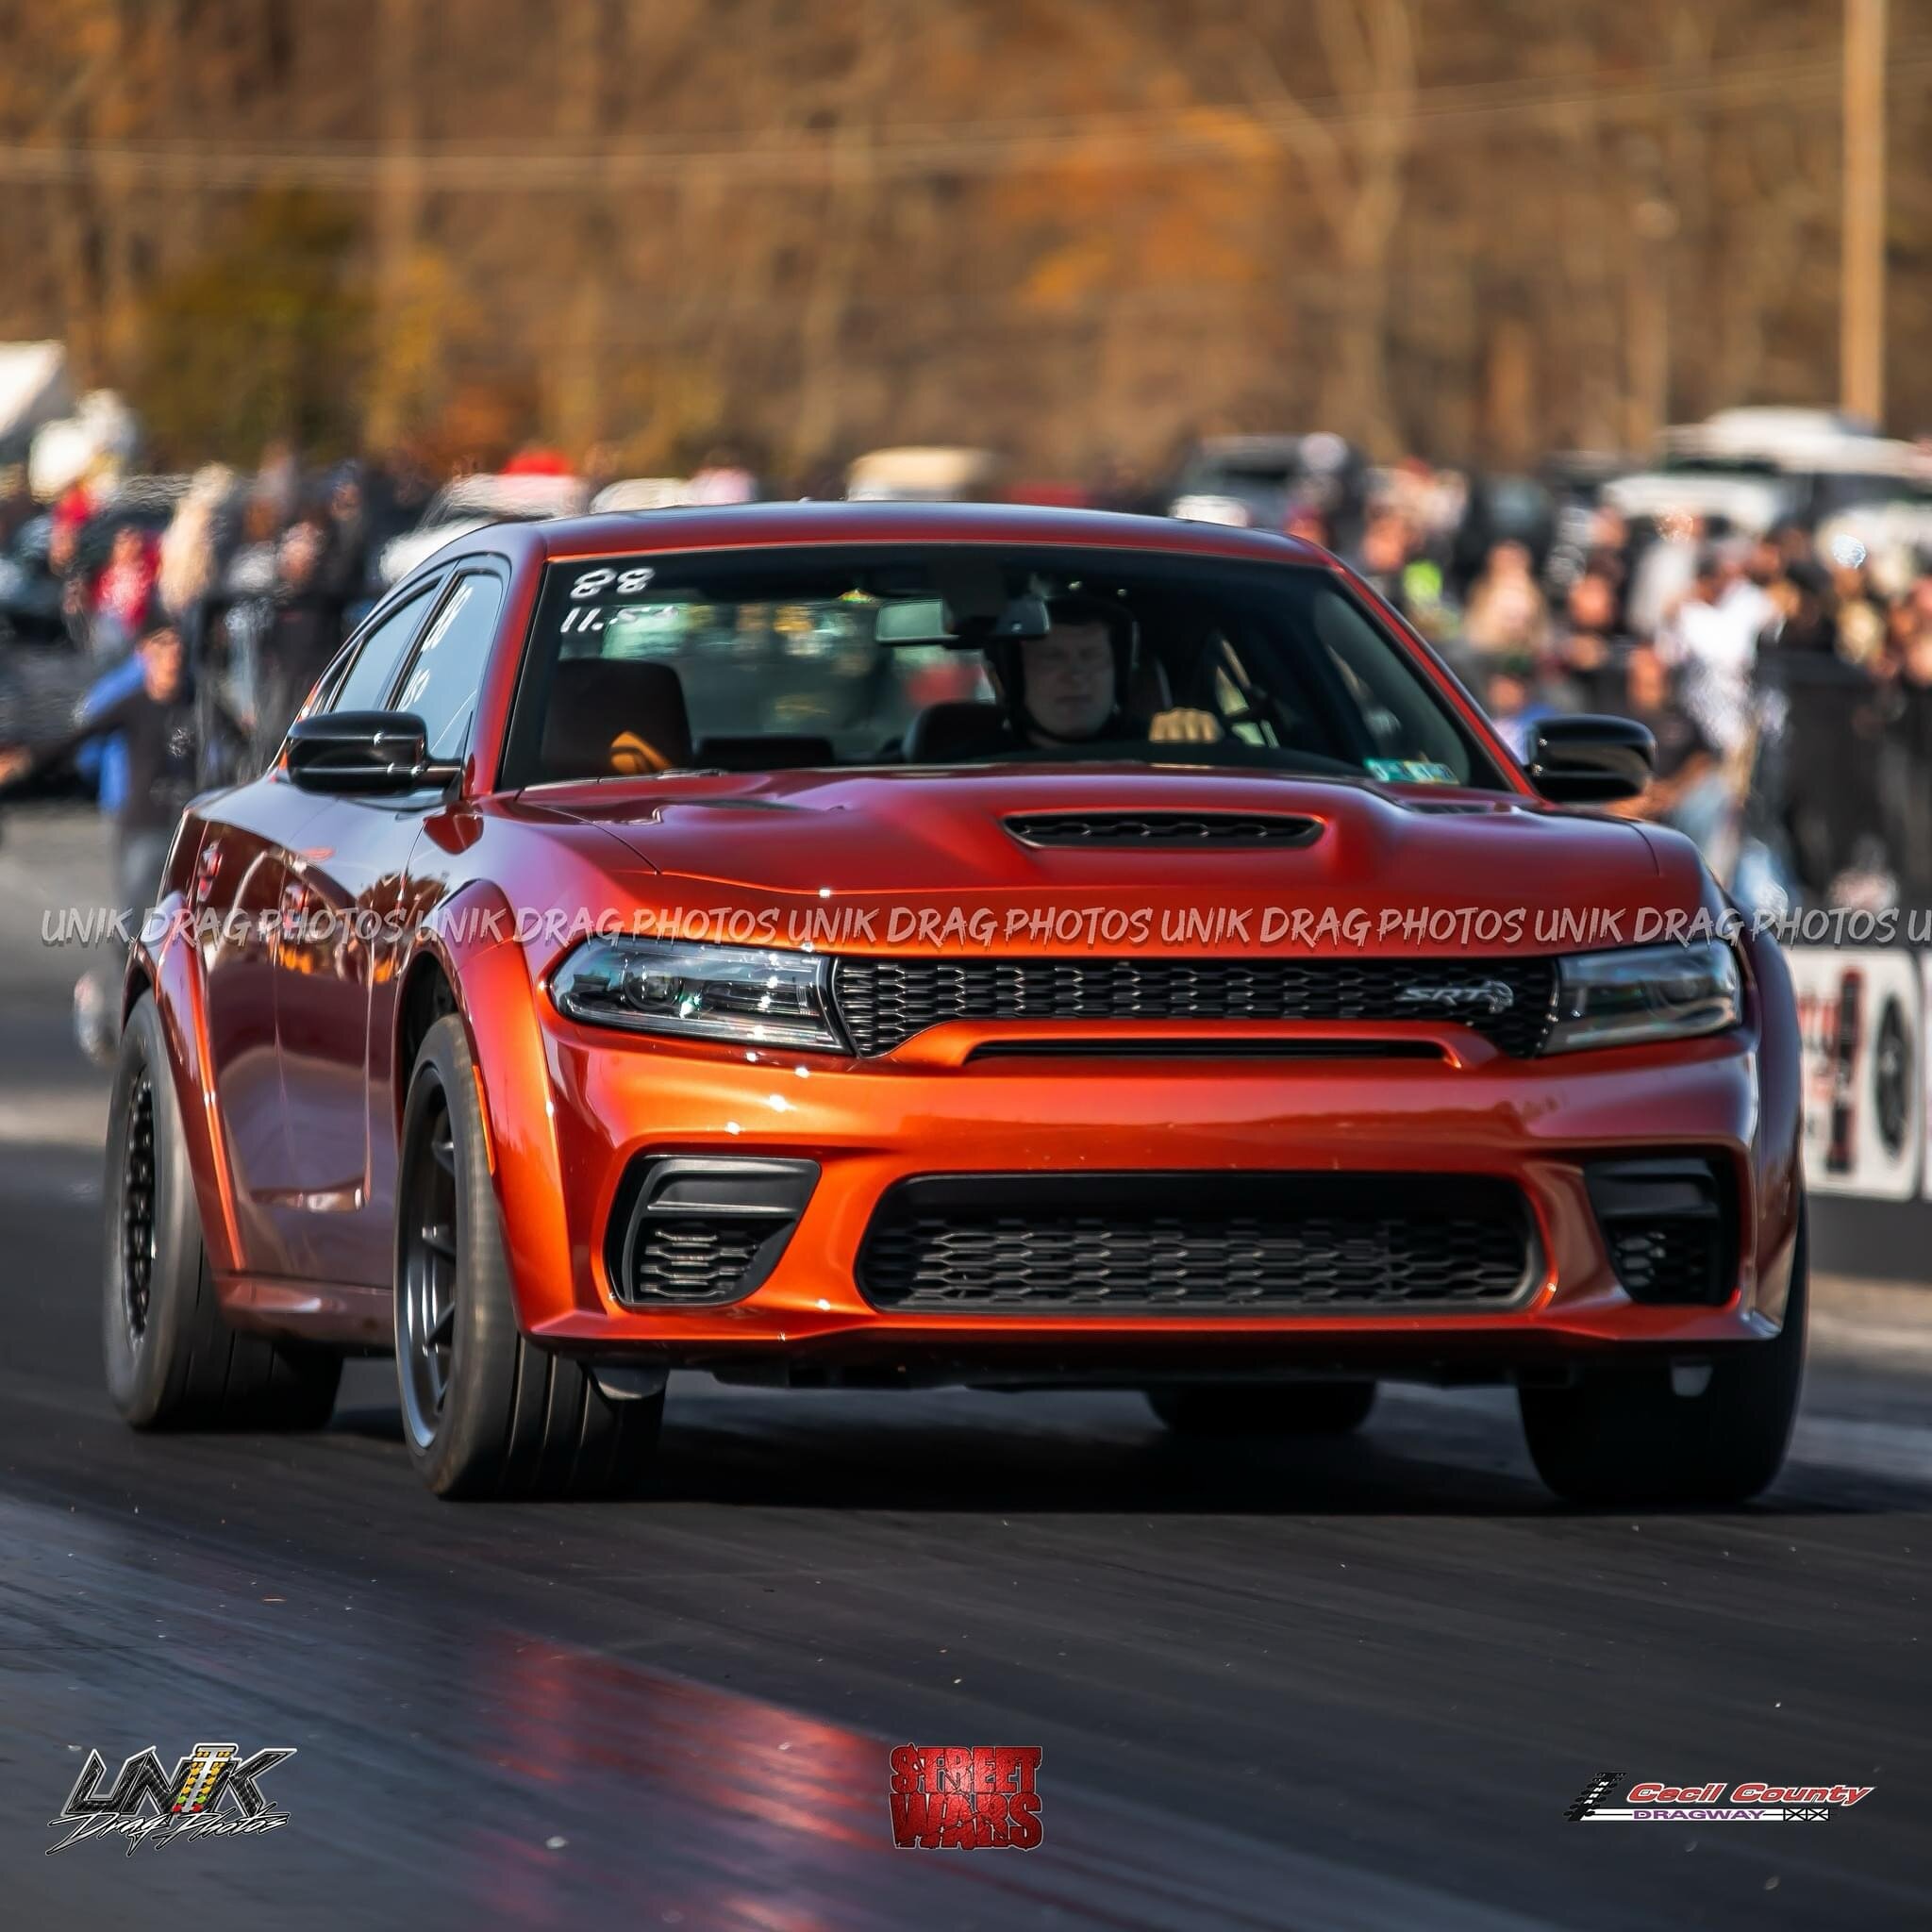 Tomorrow!! Street Wars: Imports VS Domestics on March 17th at Cecil County Dragway! 

@streetwarsevents will be open to ALL imports and domestics (cars, trucks and bikes) and every skill of driver, new and experienced! Like all OGS1320 events, this i